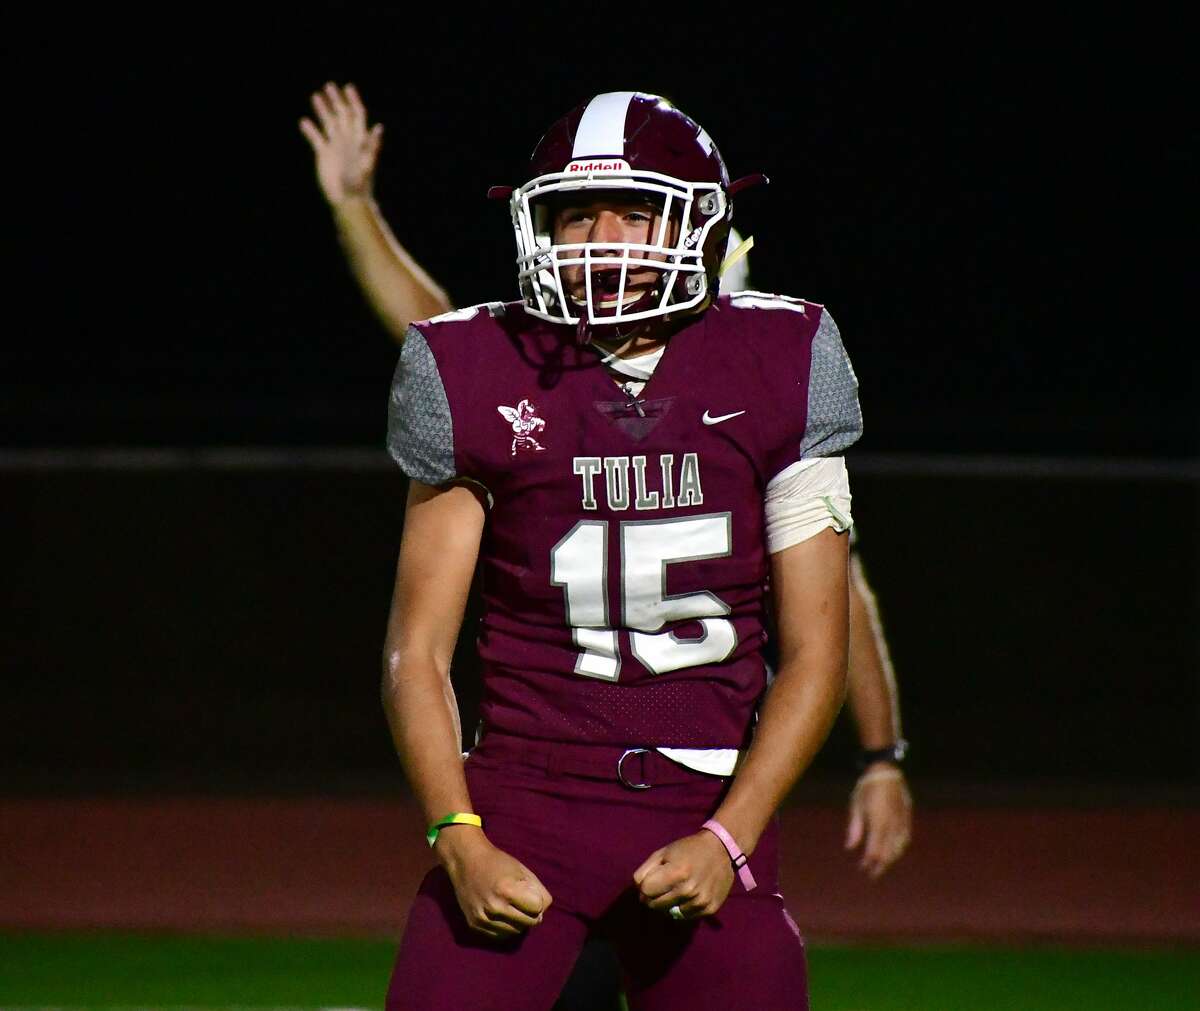 Tulia rolled past Dimmitt 47-18 in a district 3-3A Division II high school football game on Friday, Oct. 2, 2020 at Tulia.